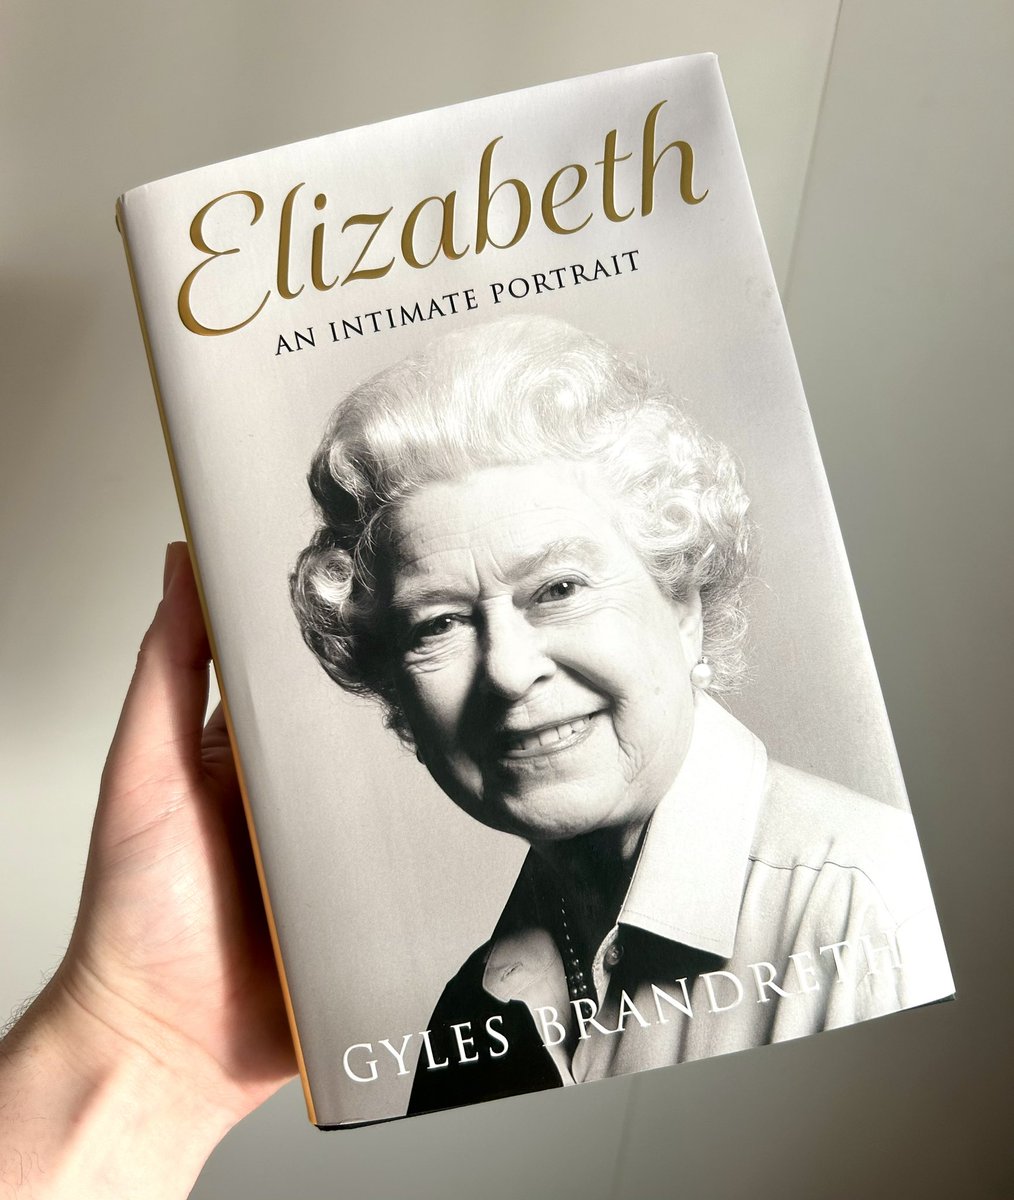 This week’s book is a little different to my normal read but thoroughly enjoying this intimate look into the life of Elizabeth II. 📚 

#photofriday #historybookchat